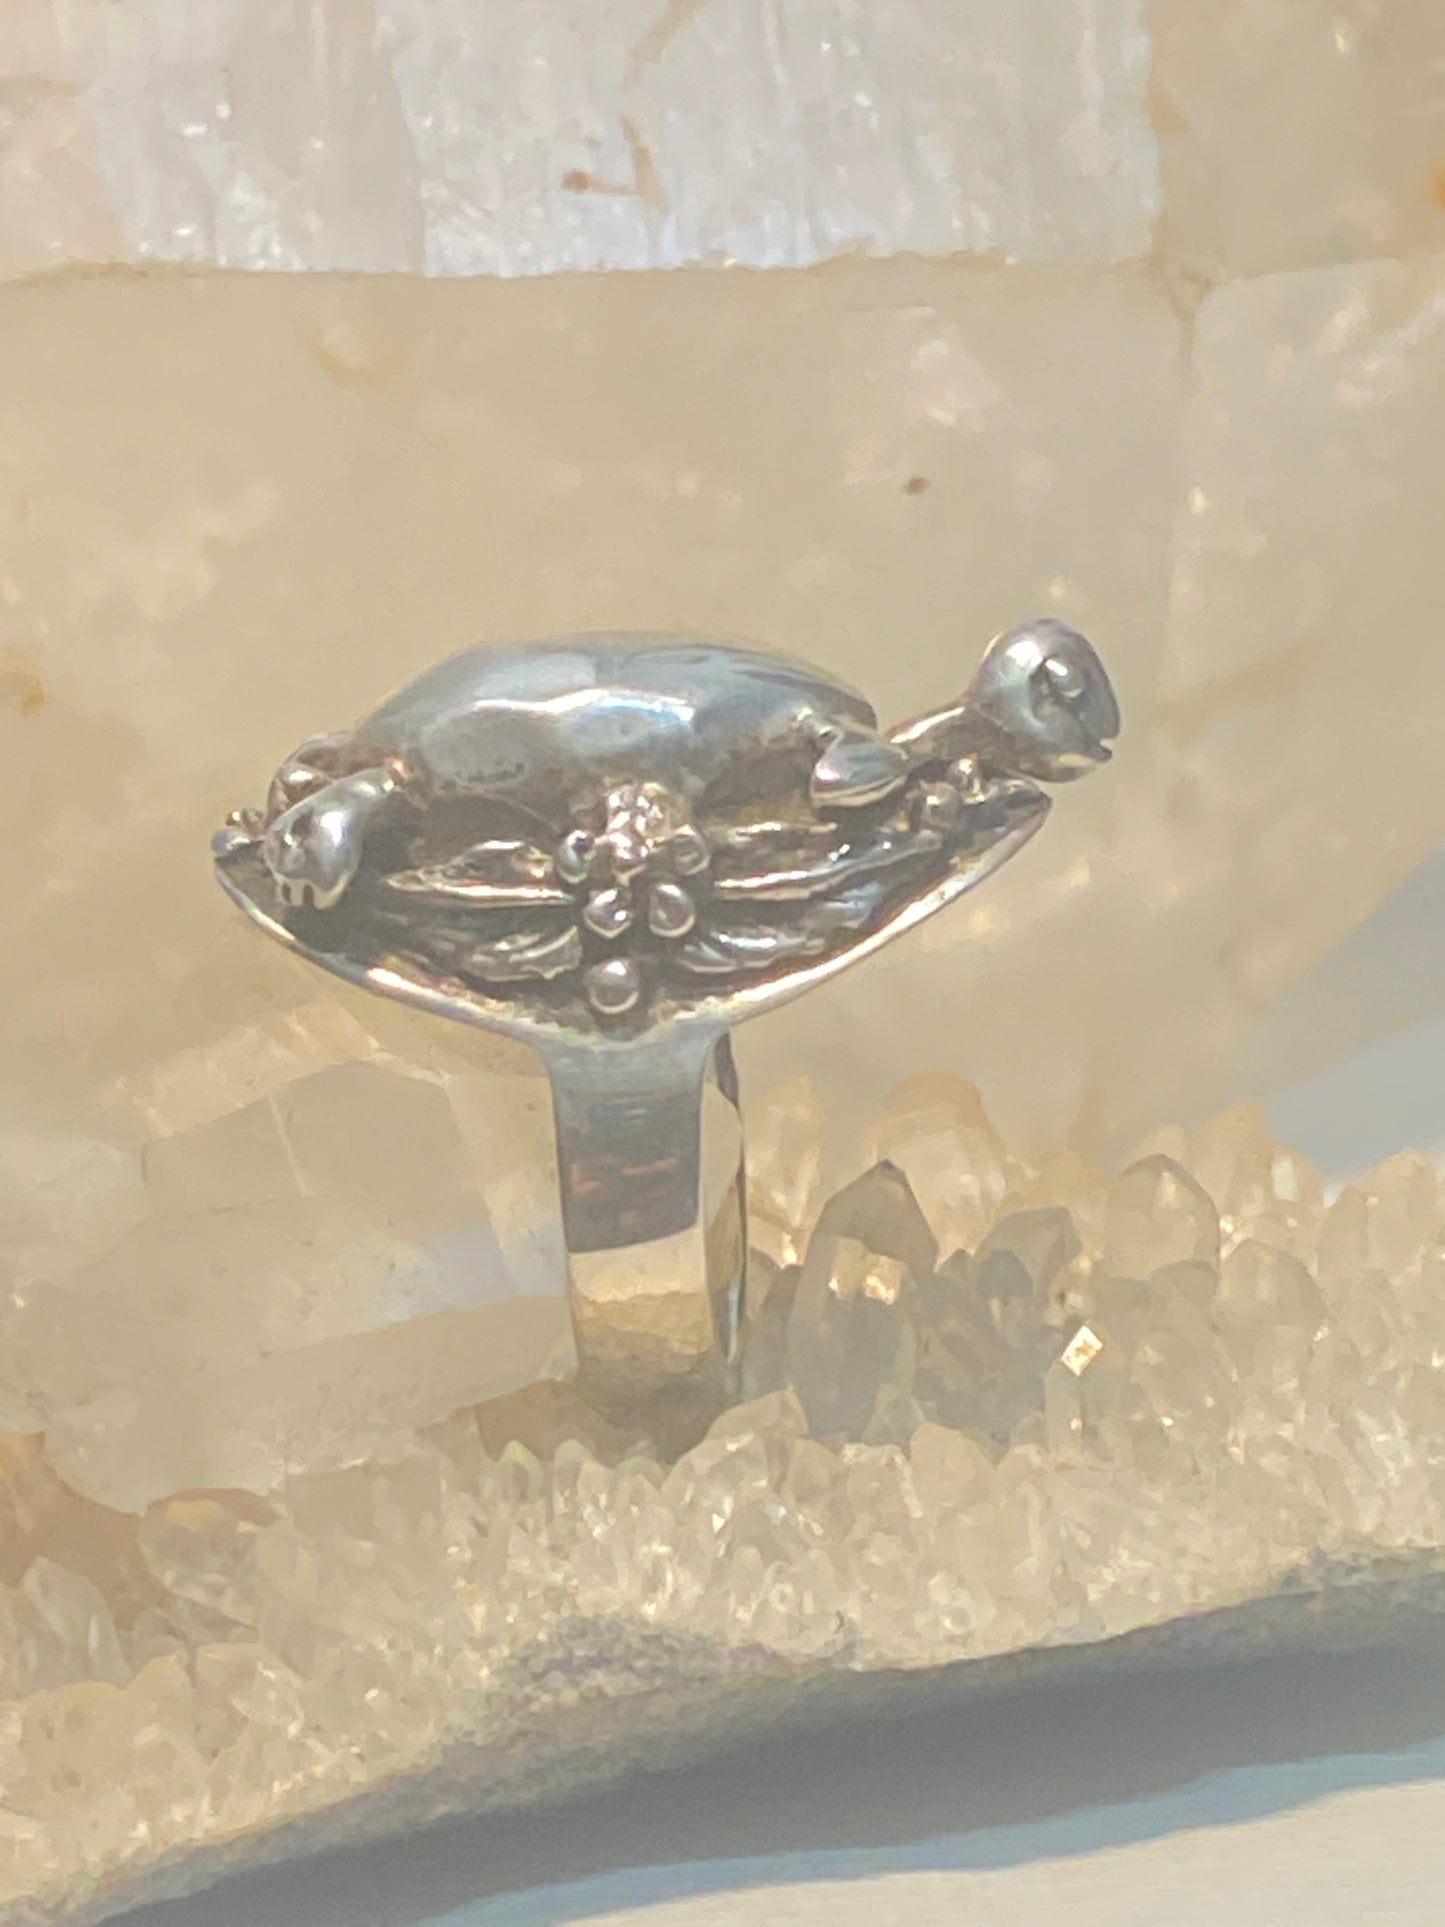 Turtle ring moving head floral band sterling silver women girls